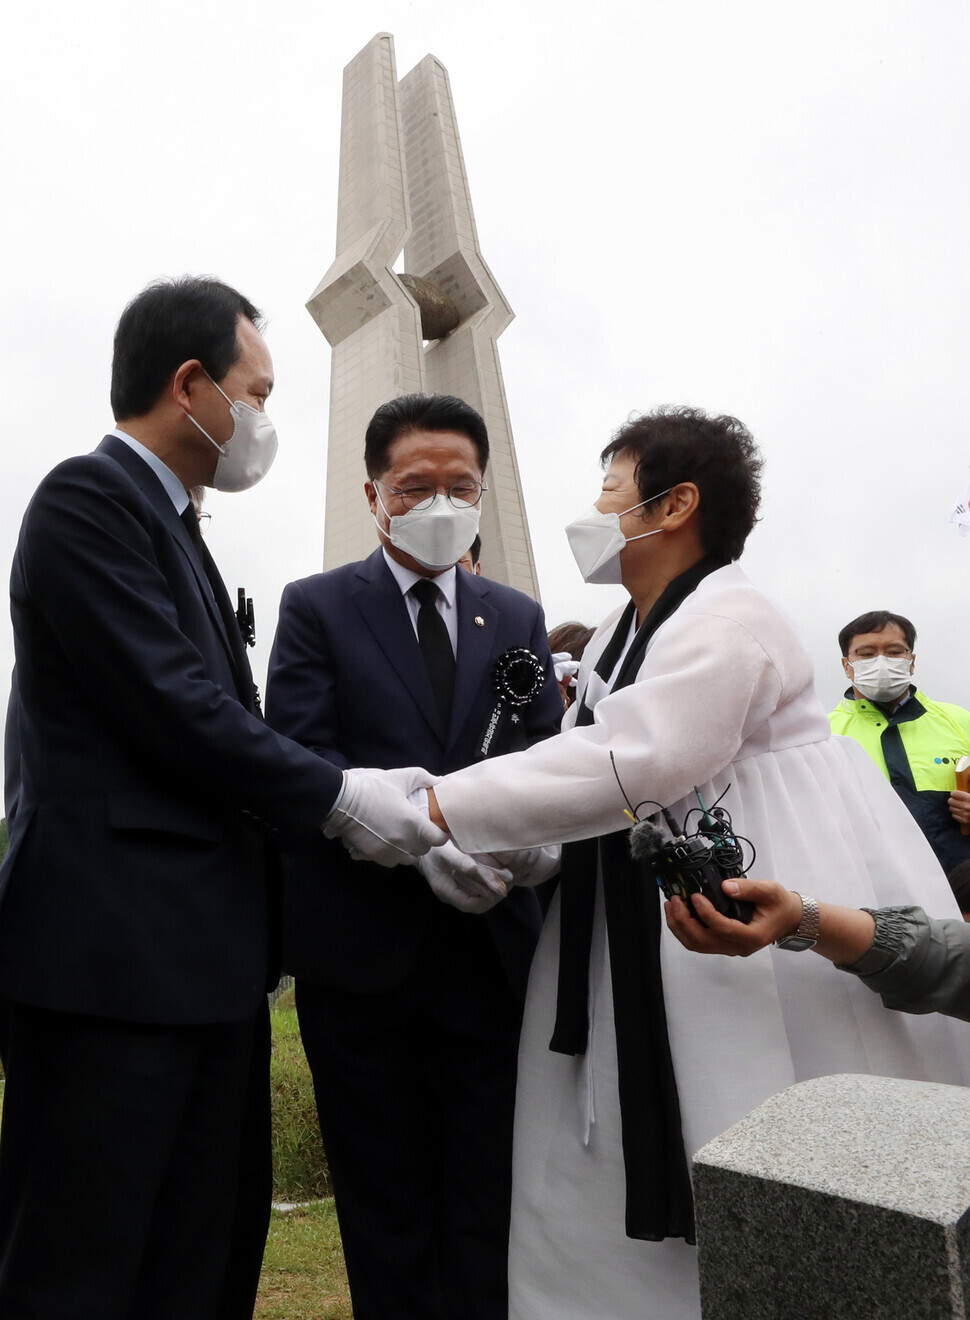 People Power Party lawmakers Sung Il-jong (left) and Chung Woon-chun (middle) console a woman who lost a family member in the Gwangju Uprising in 1980 at a commemorative service held for the victims at the May 18 National Cemetery, on Monday. (Yonhap News)